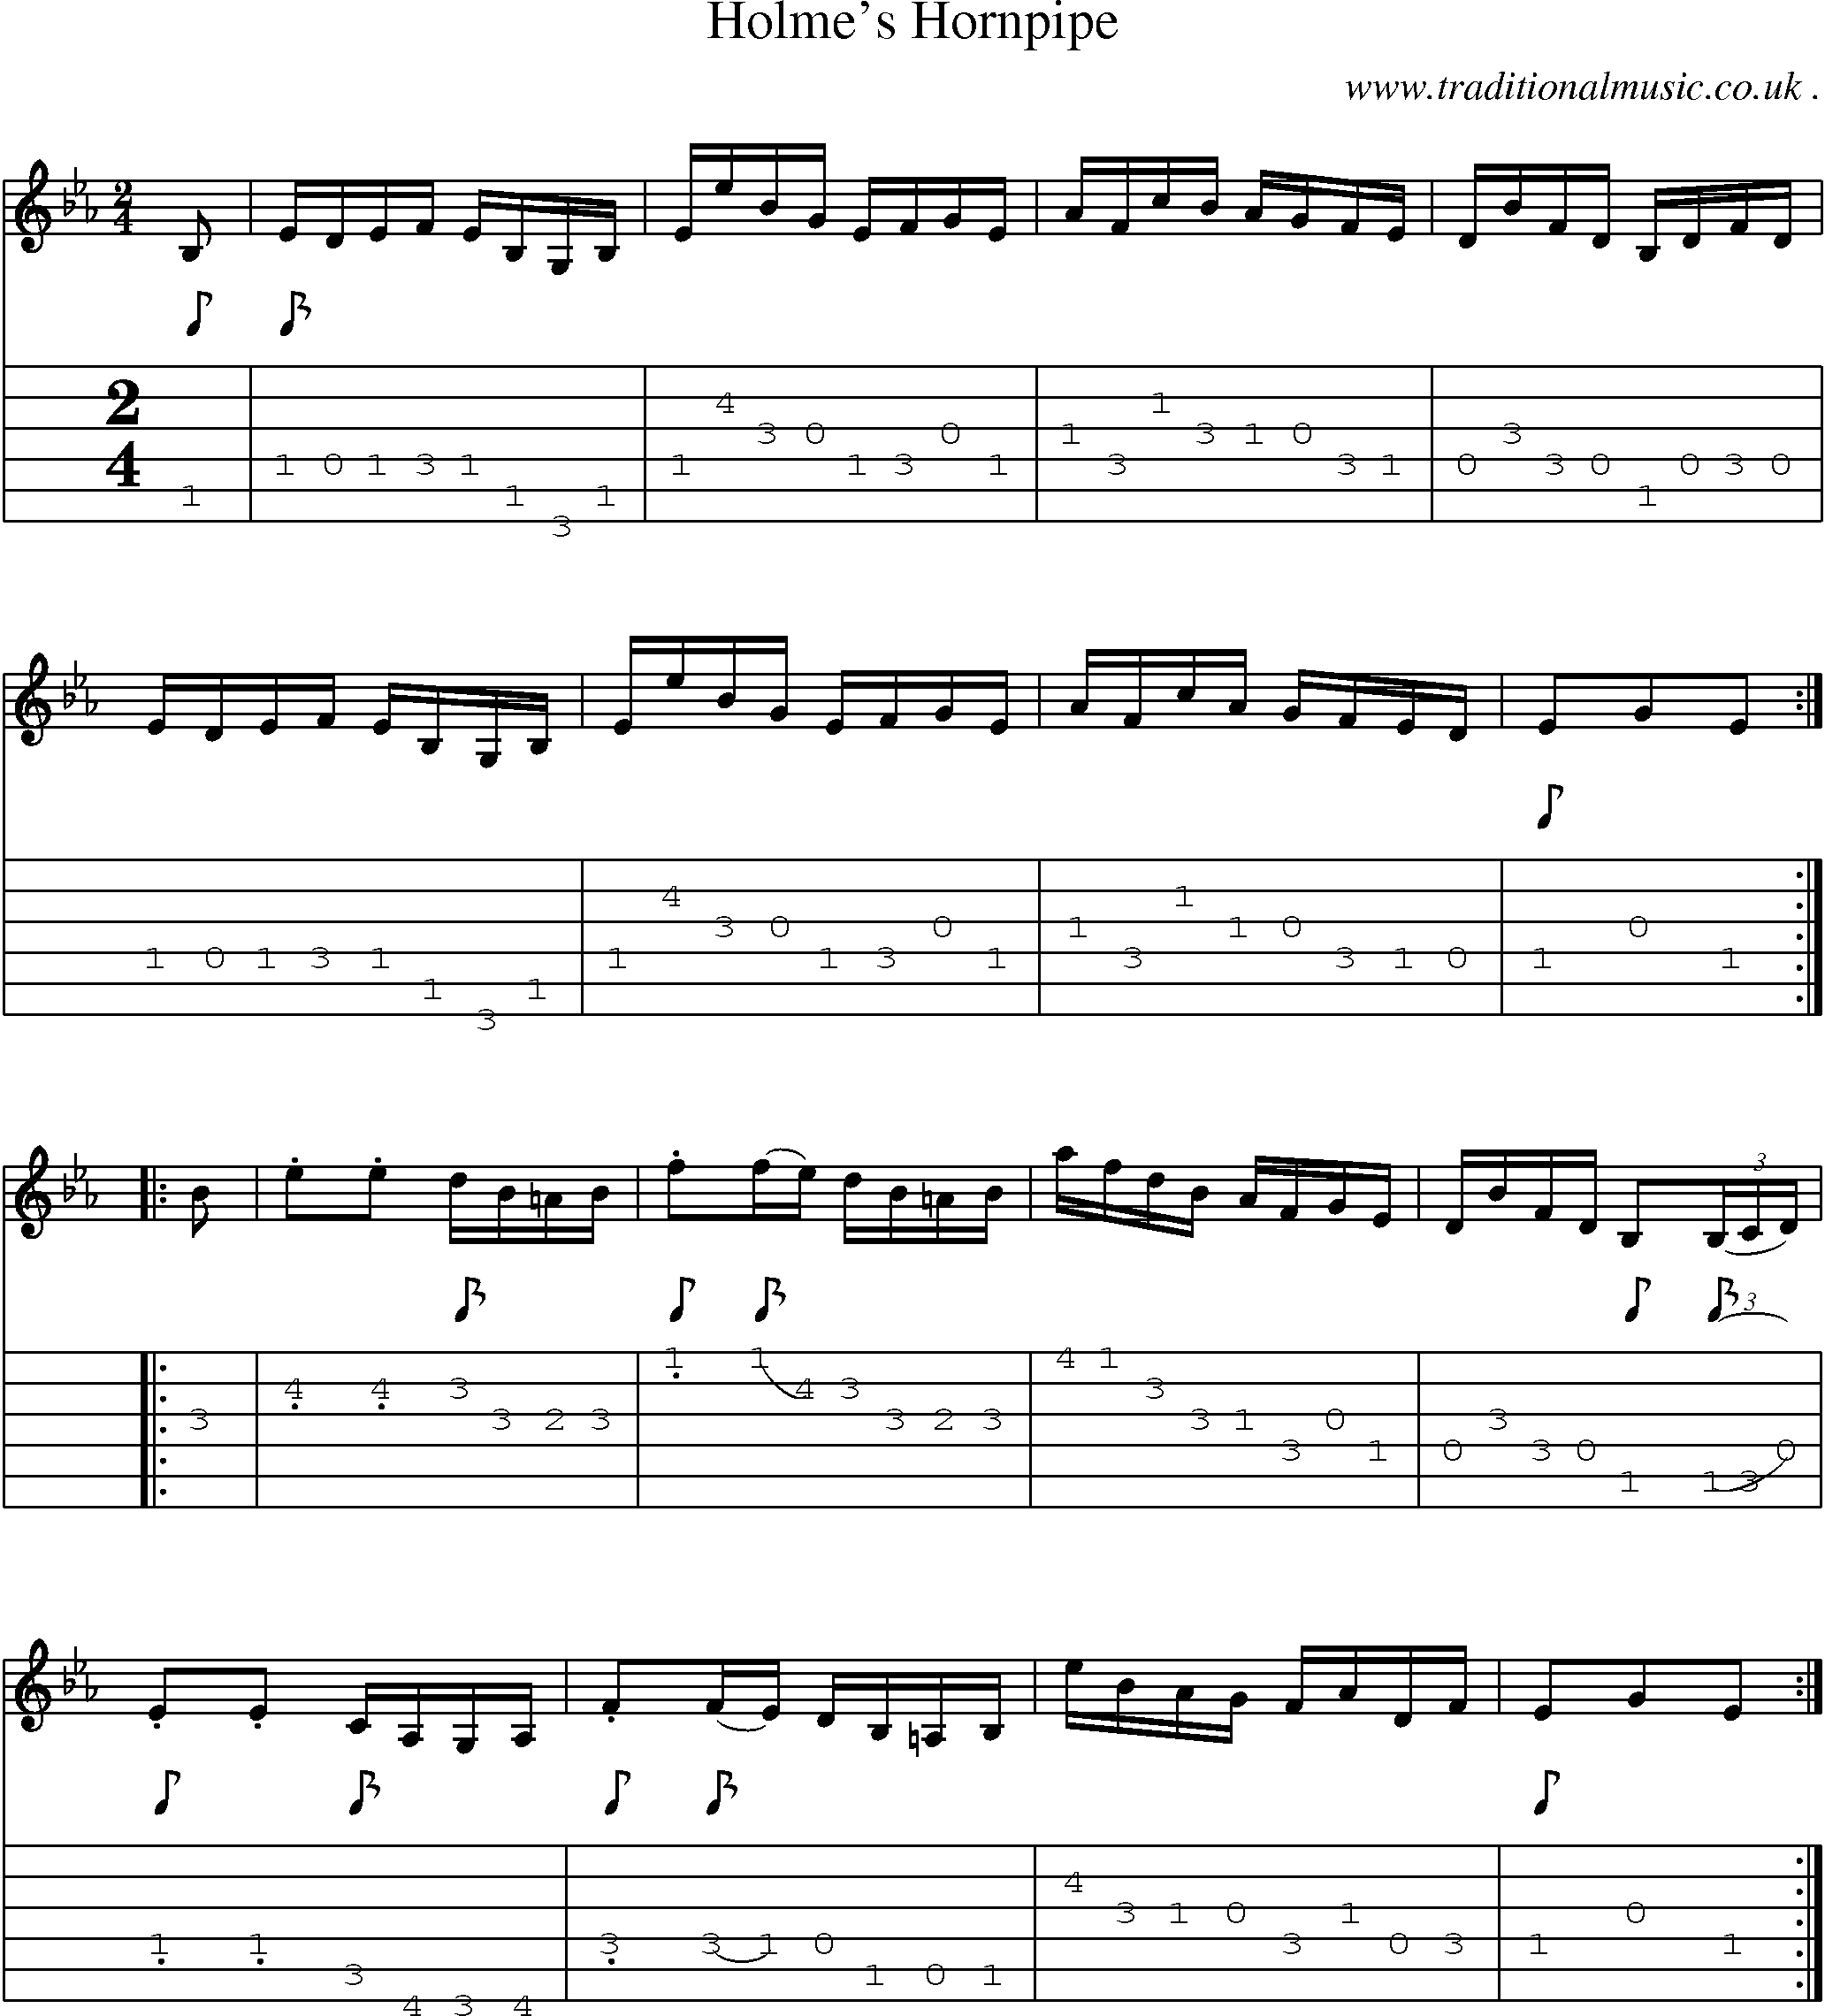 Sheet-Music and Guitar Tabs for Holmes Hornpipe